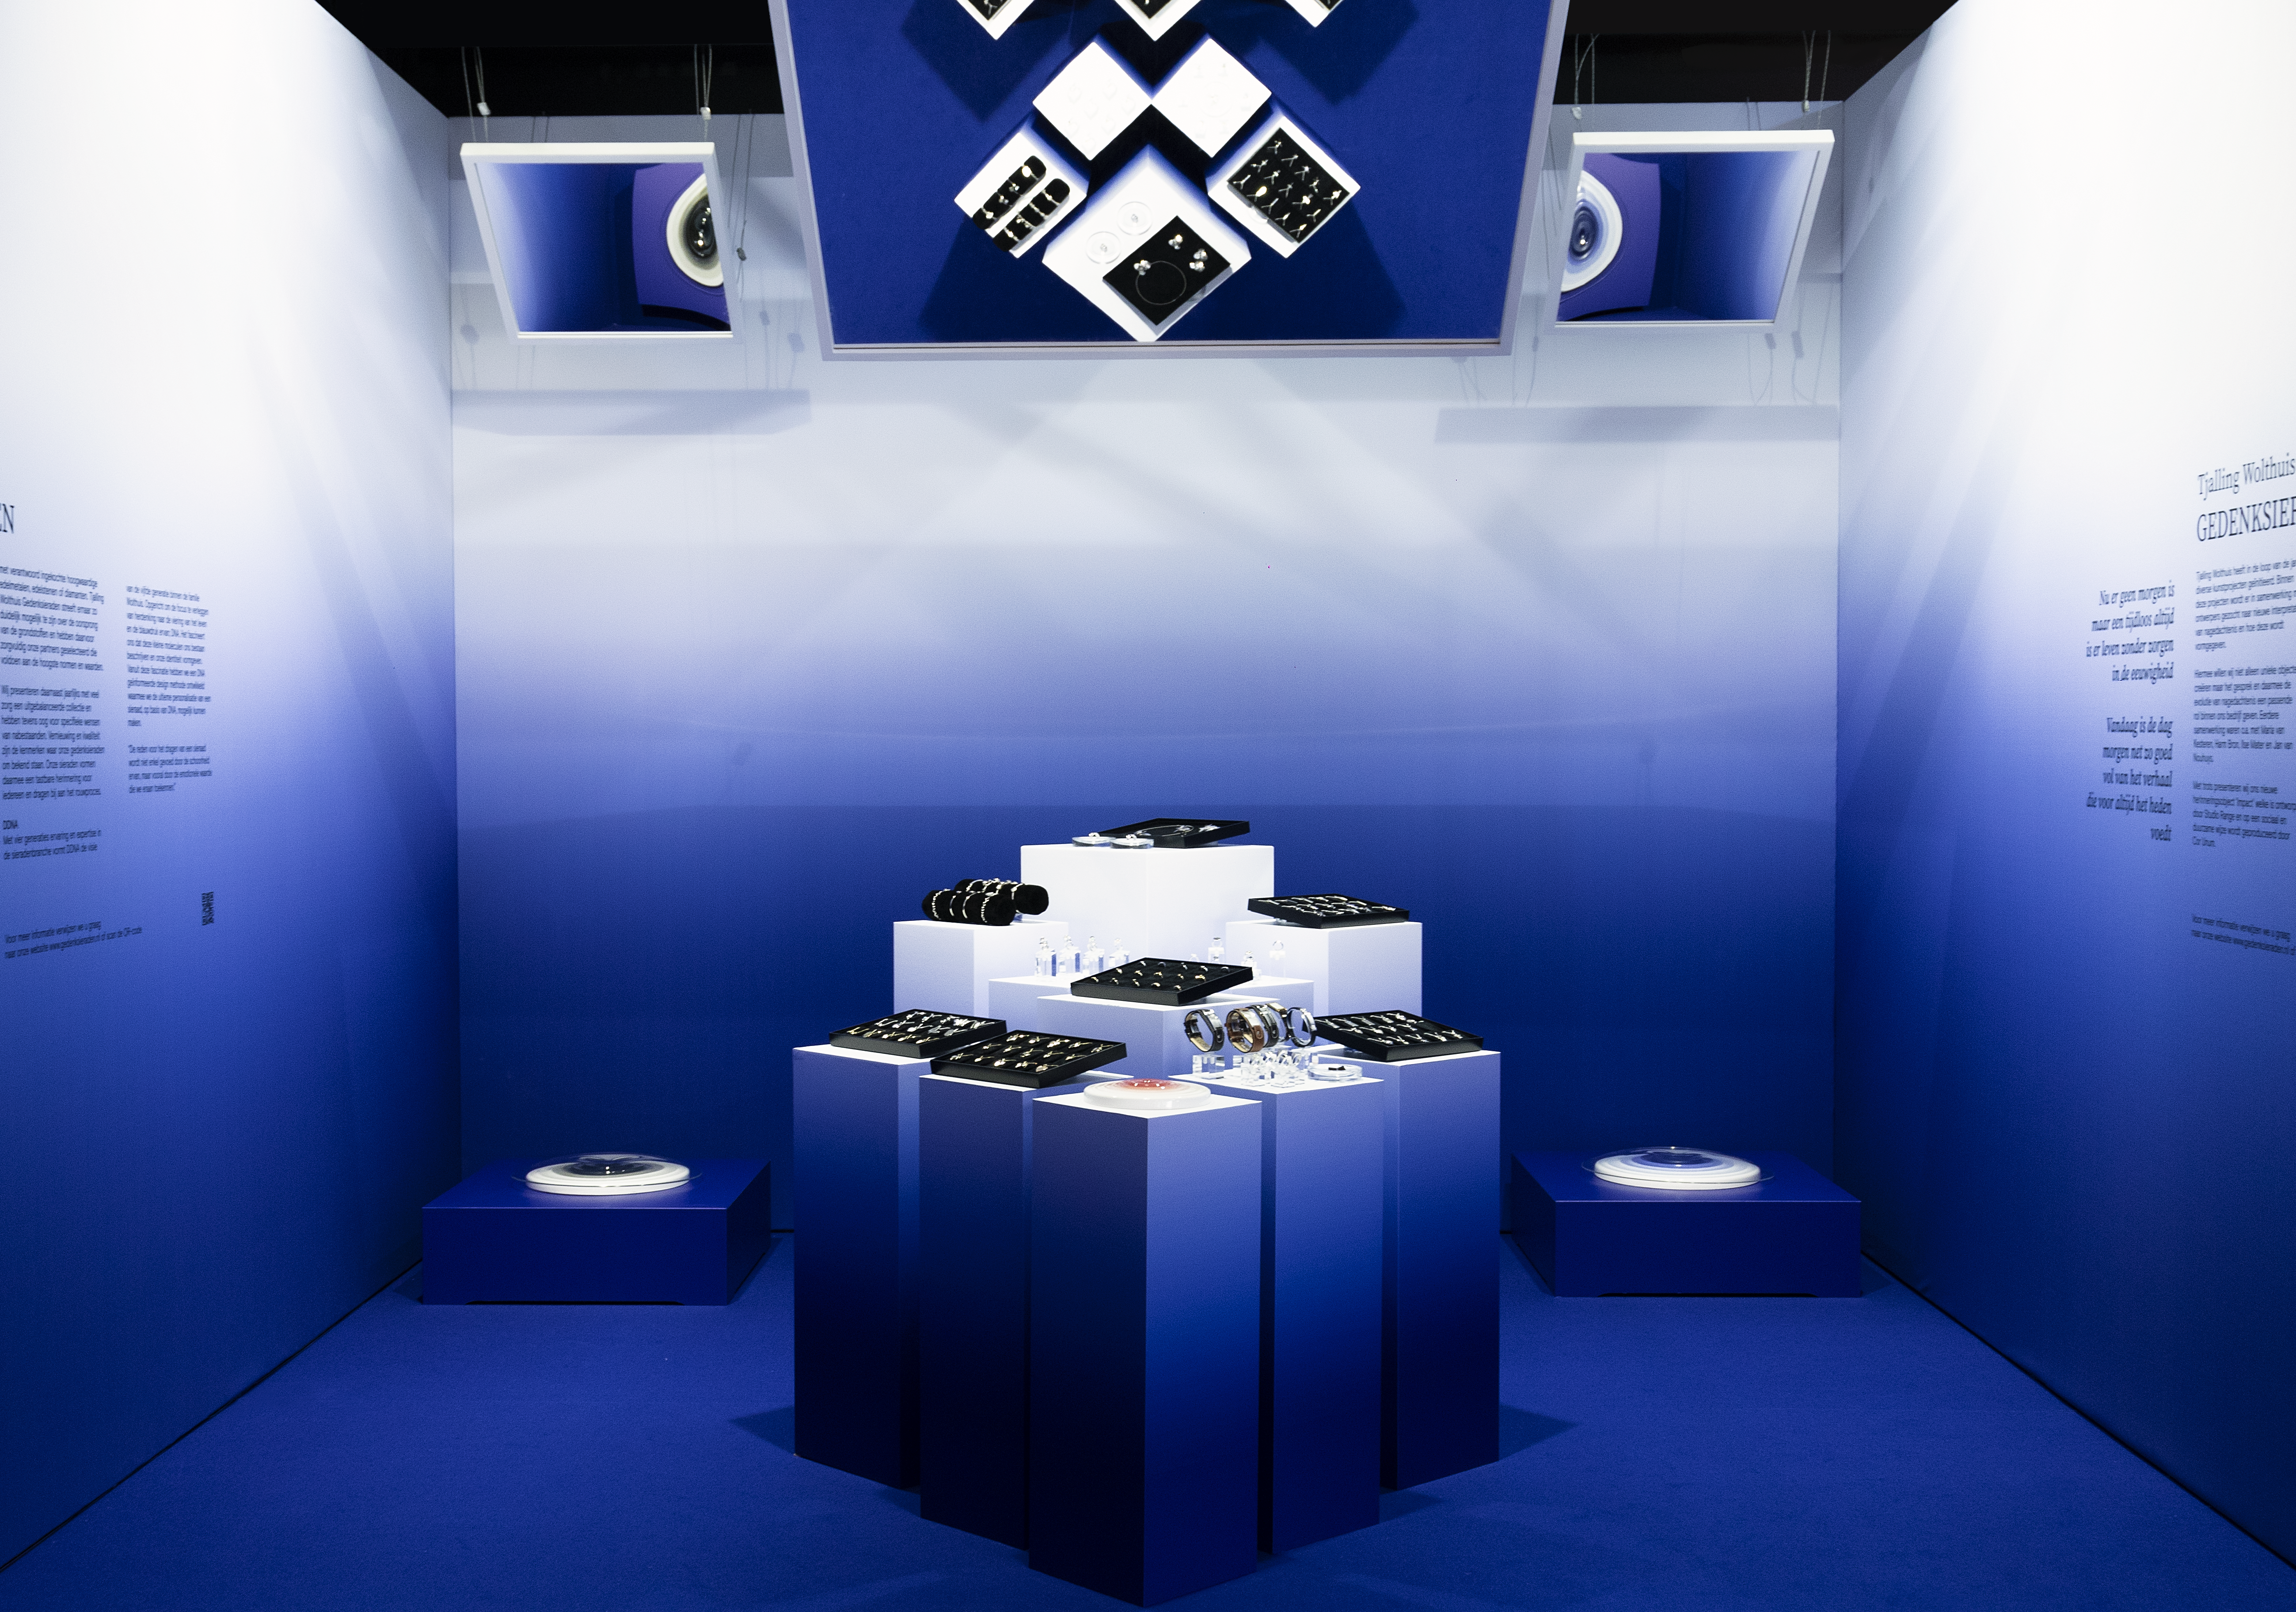 Installation design with an overal blue gradient and 3 suspended mirrors